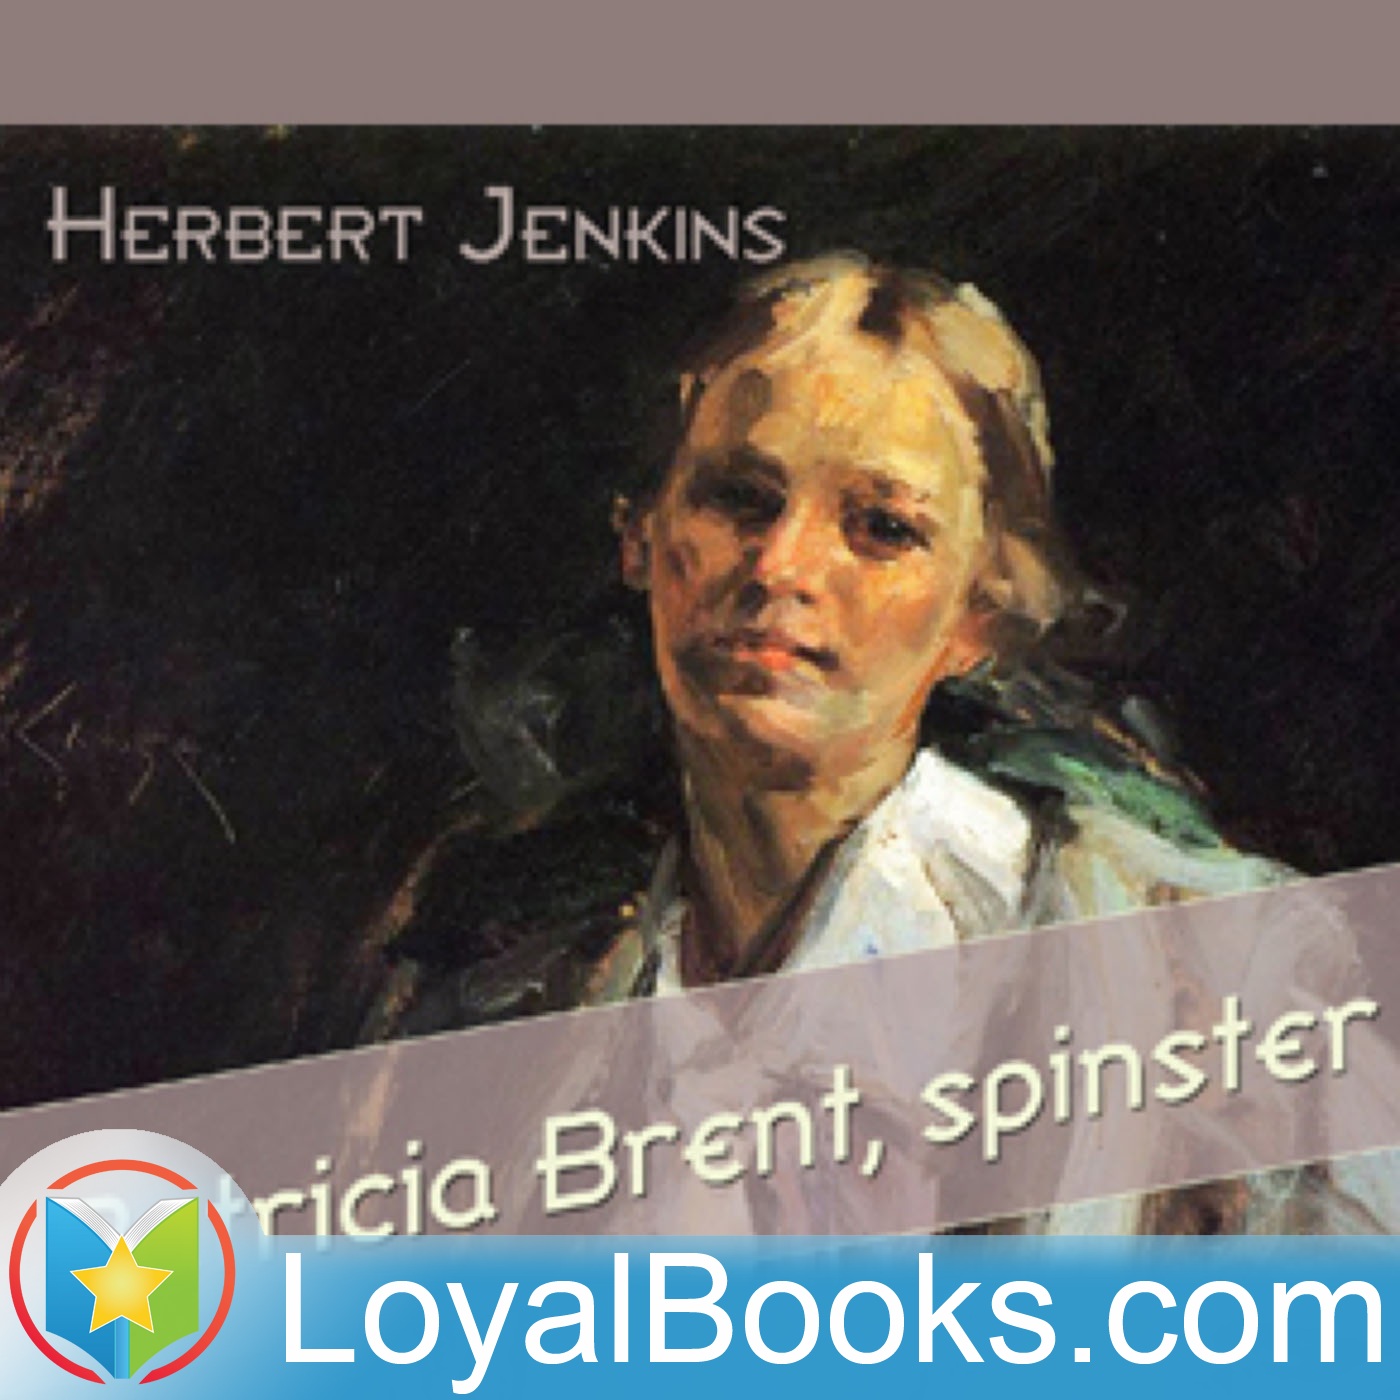 Patricia Brent, spinster by Herbert Jenkins